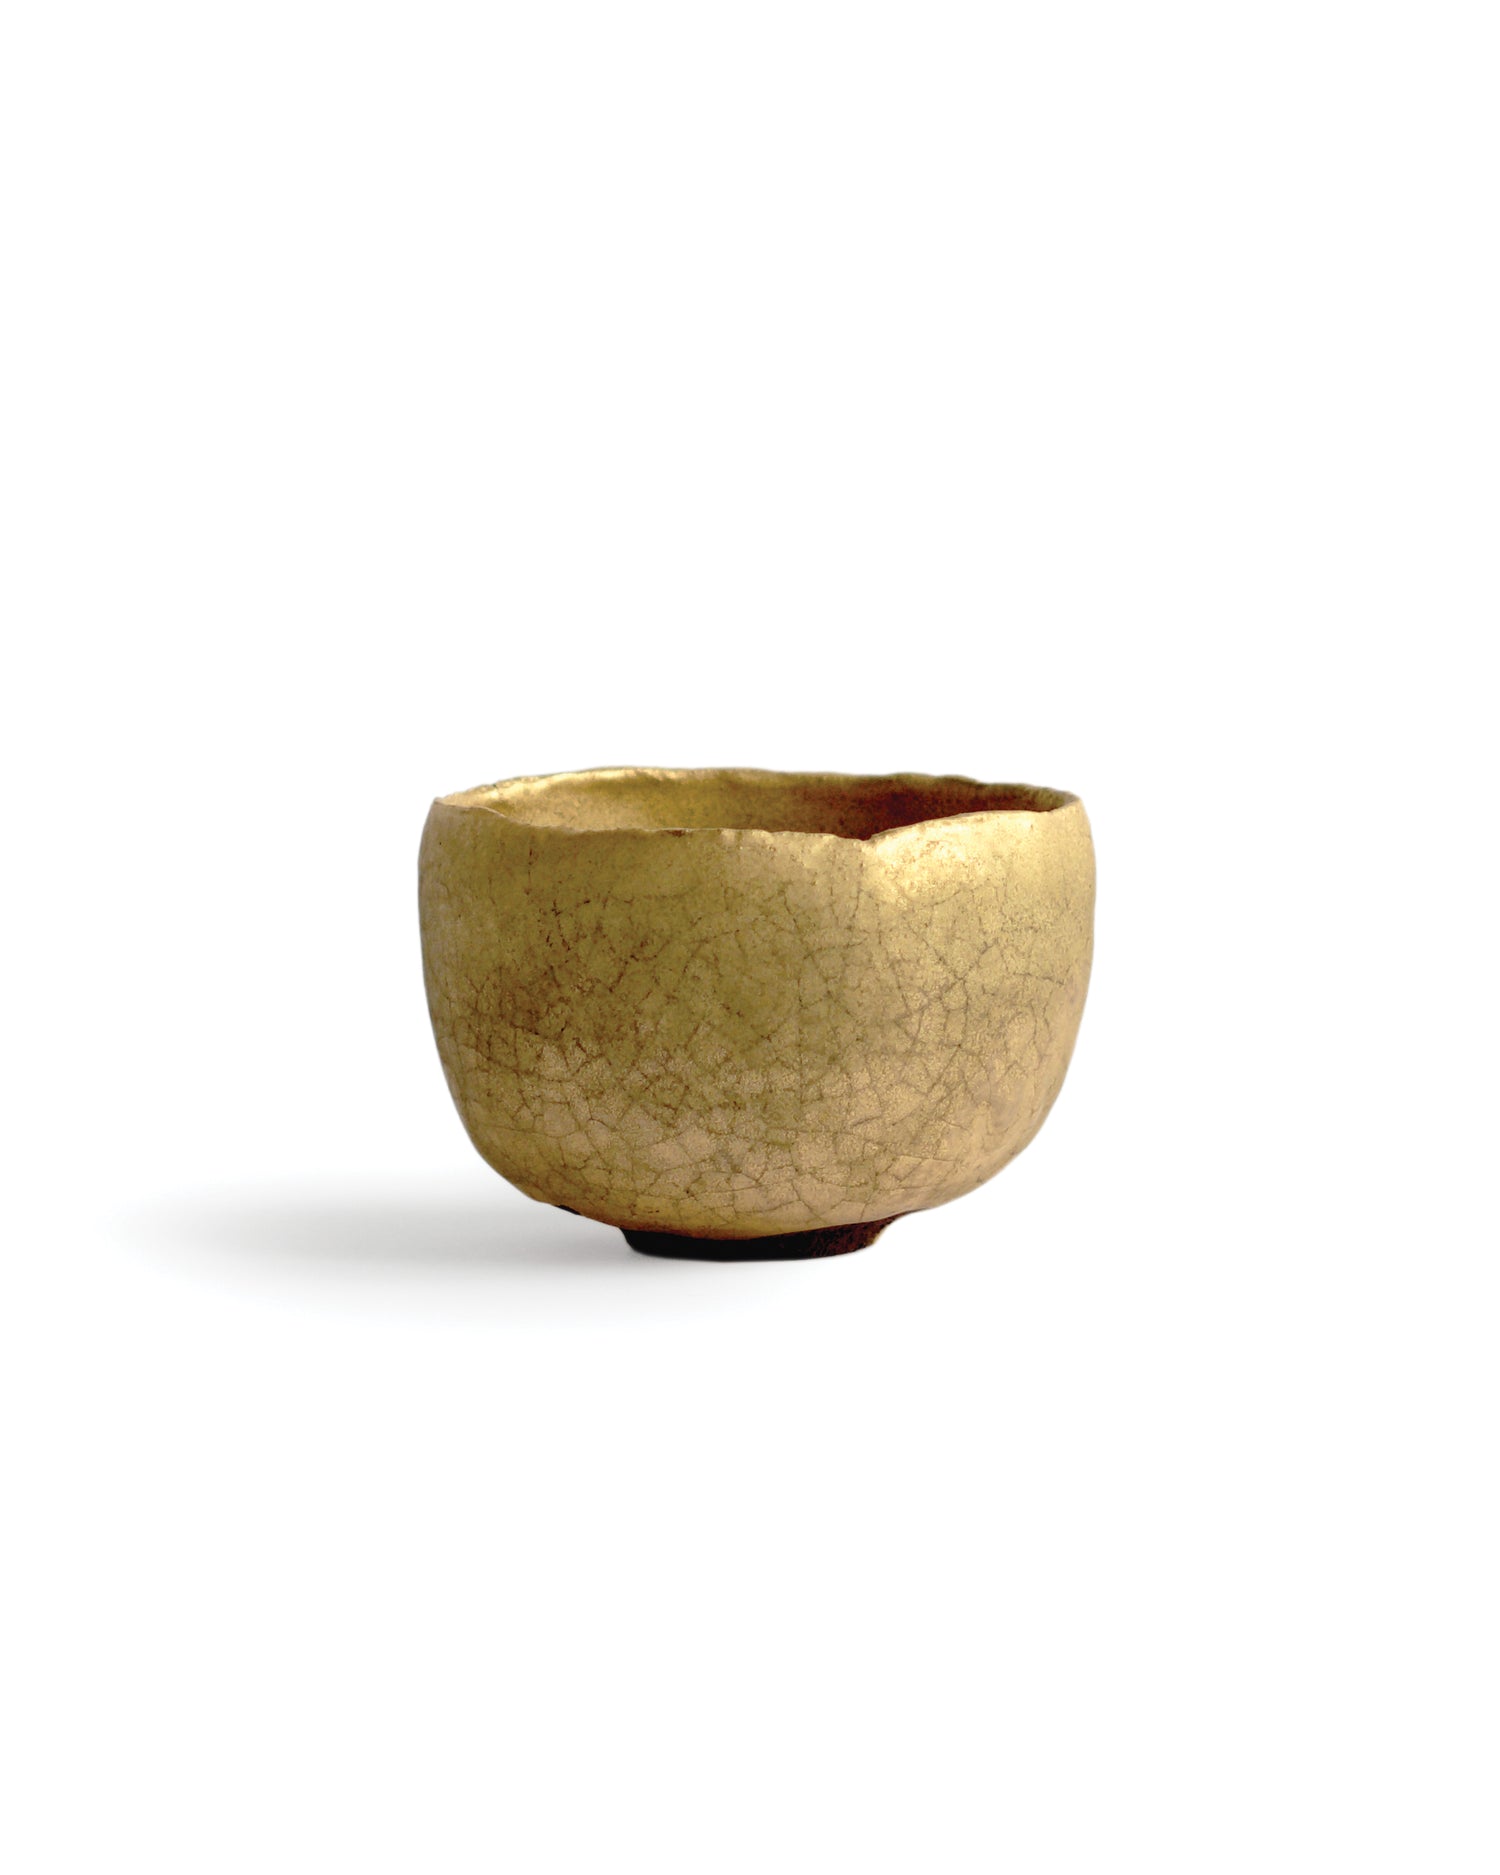 Gold Chawan XII silhouetted against white background.